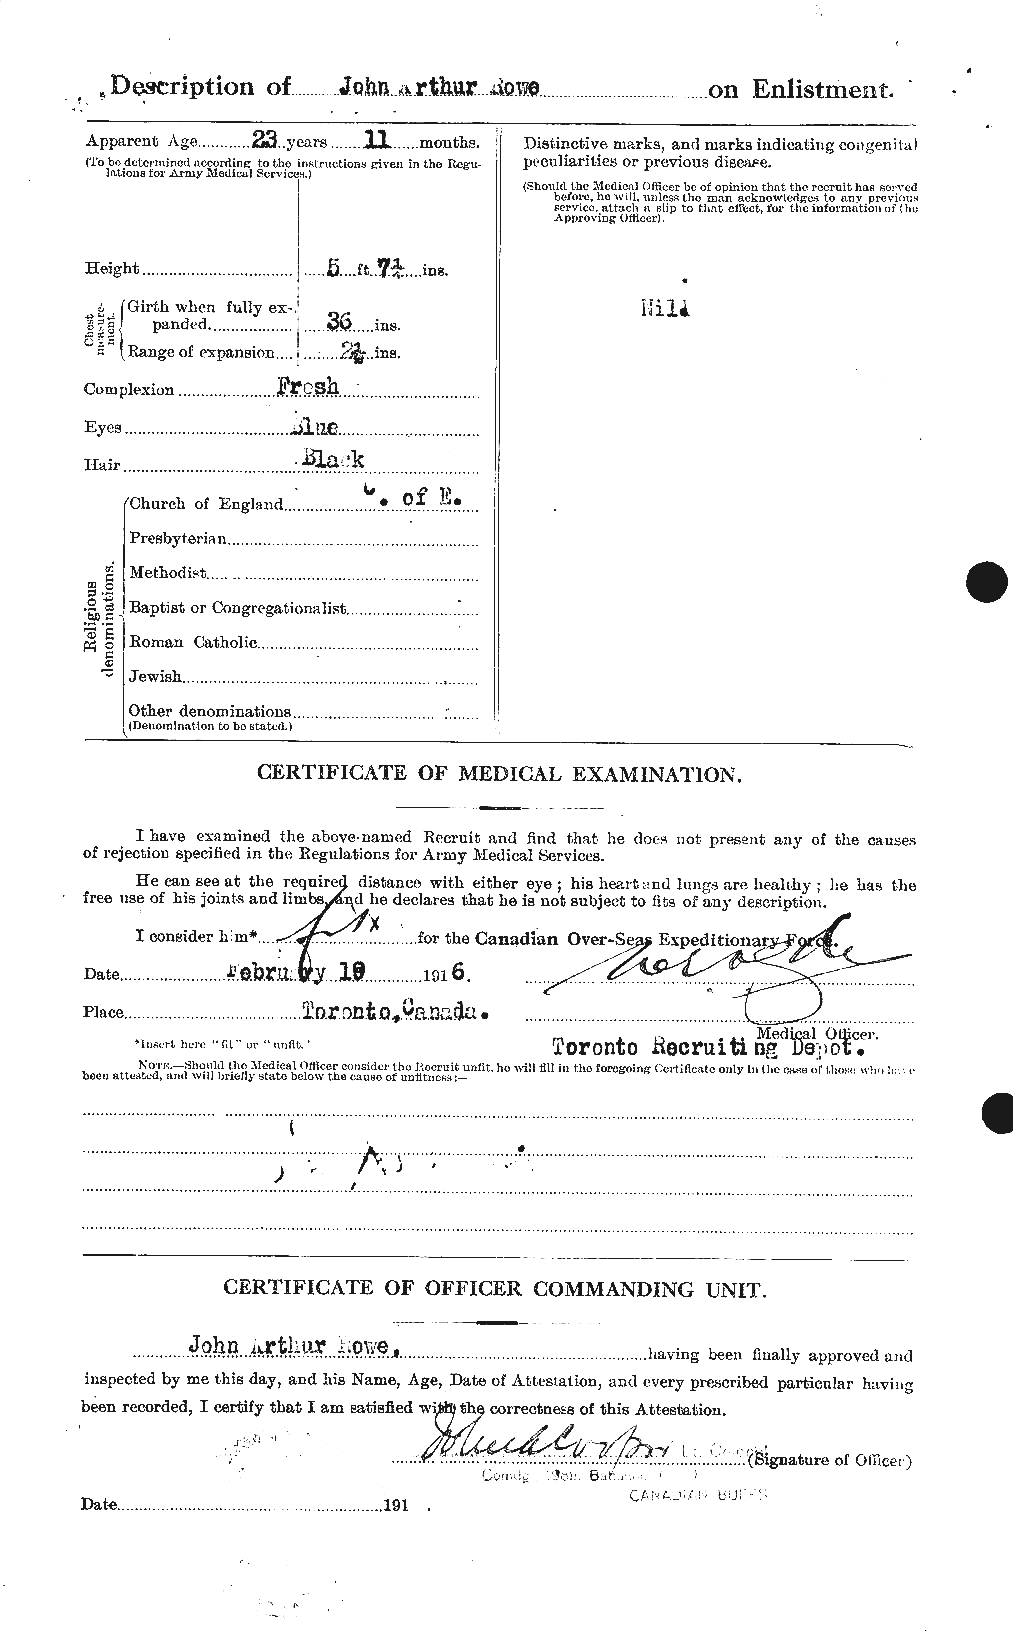 Personnel Records of the First World War - CEF 615927b